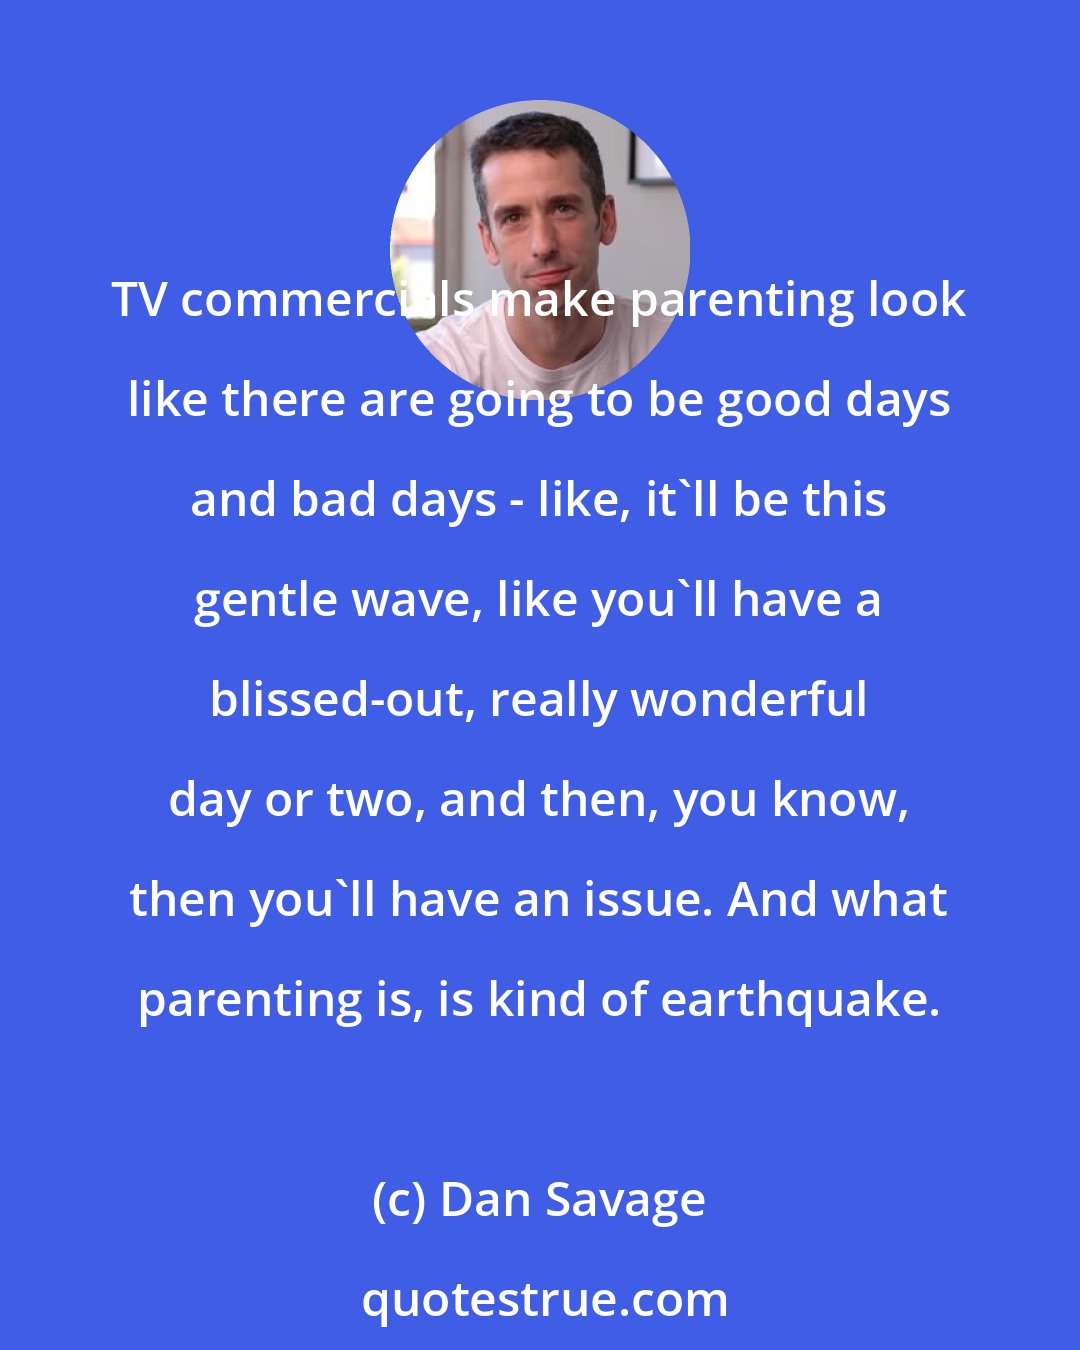 Dan Savage: TV commercials make parenting look like there are going to be good days and bad days - like, it'll be this gentle wave, like you'll have a blissed-out, really wonderful day or two, and then, you know, then you'll have an issue. And what parenting is, is kind of earthquake.